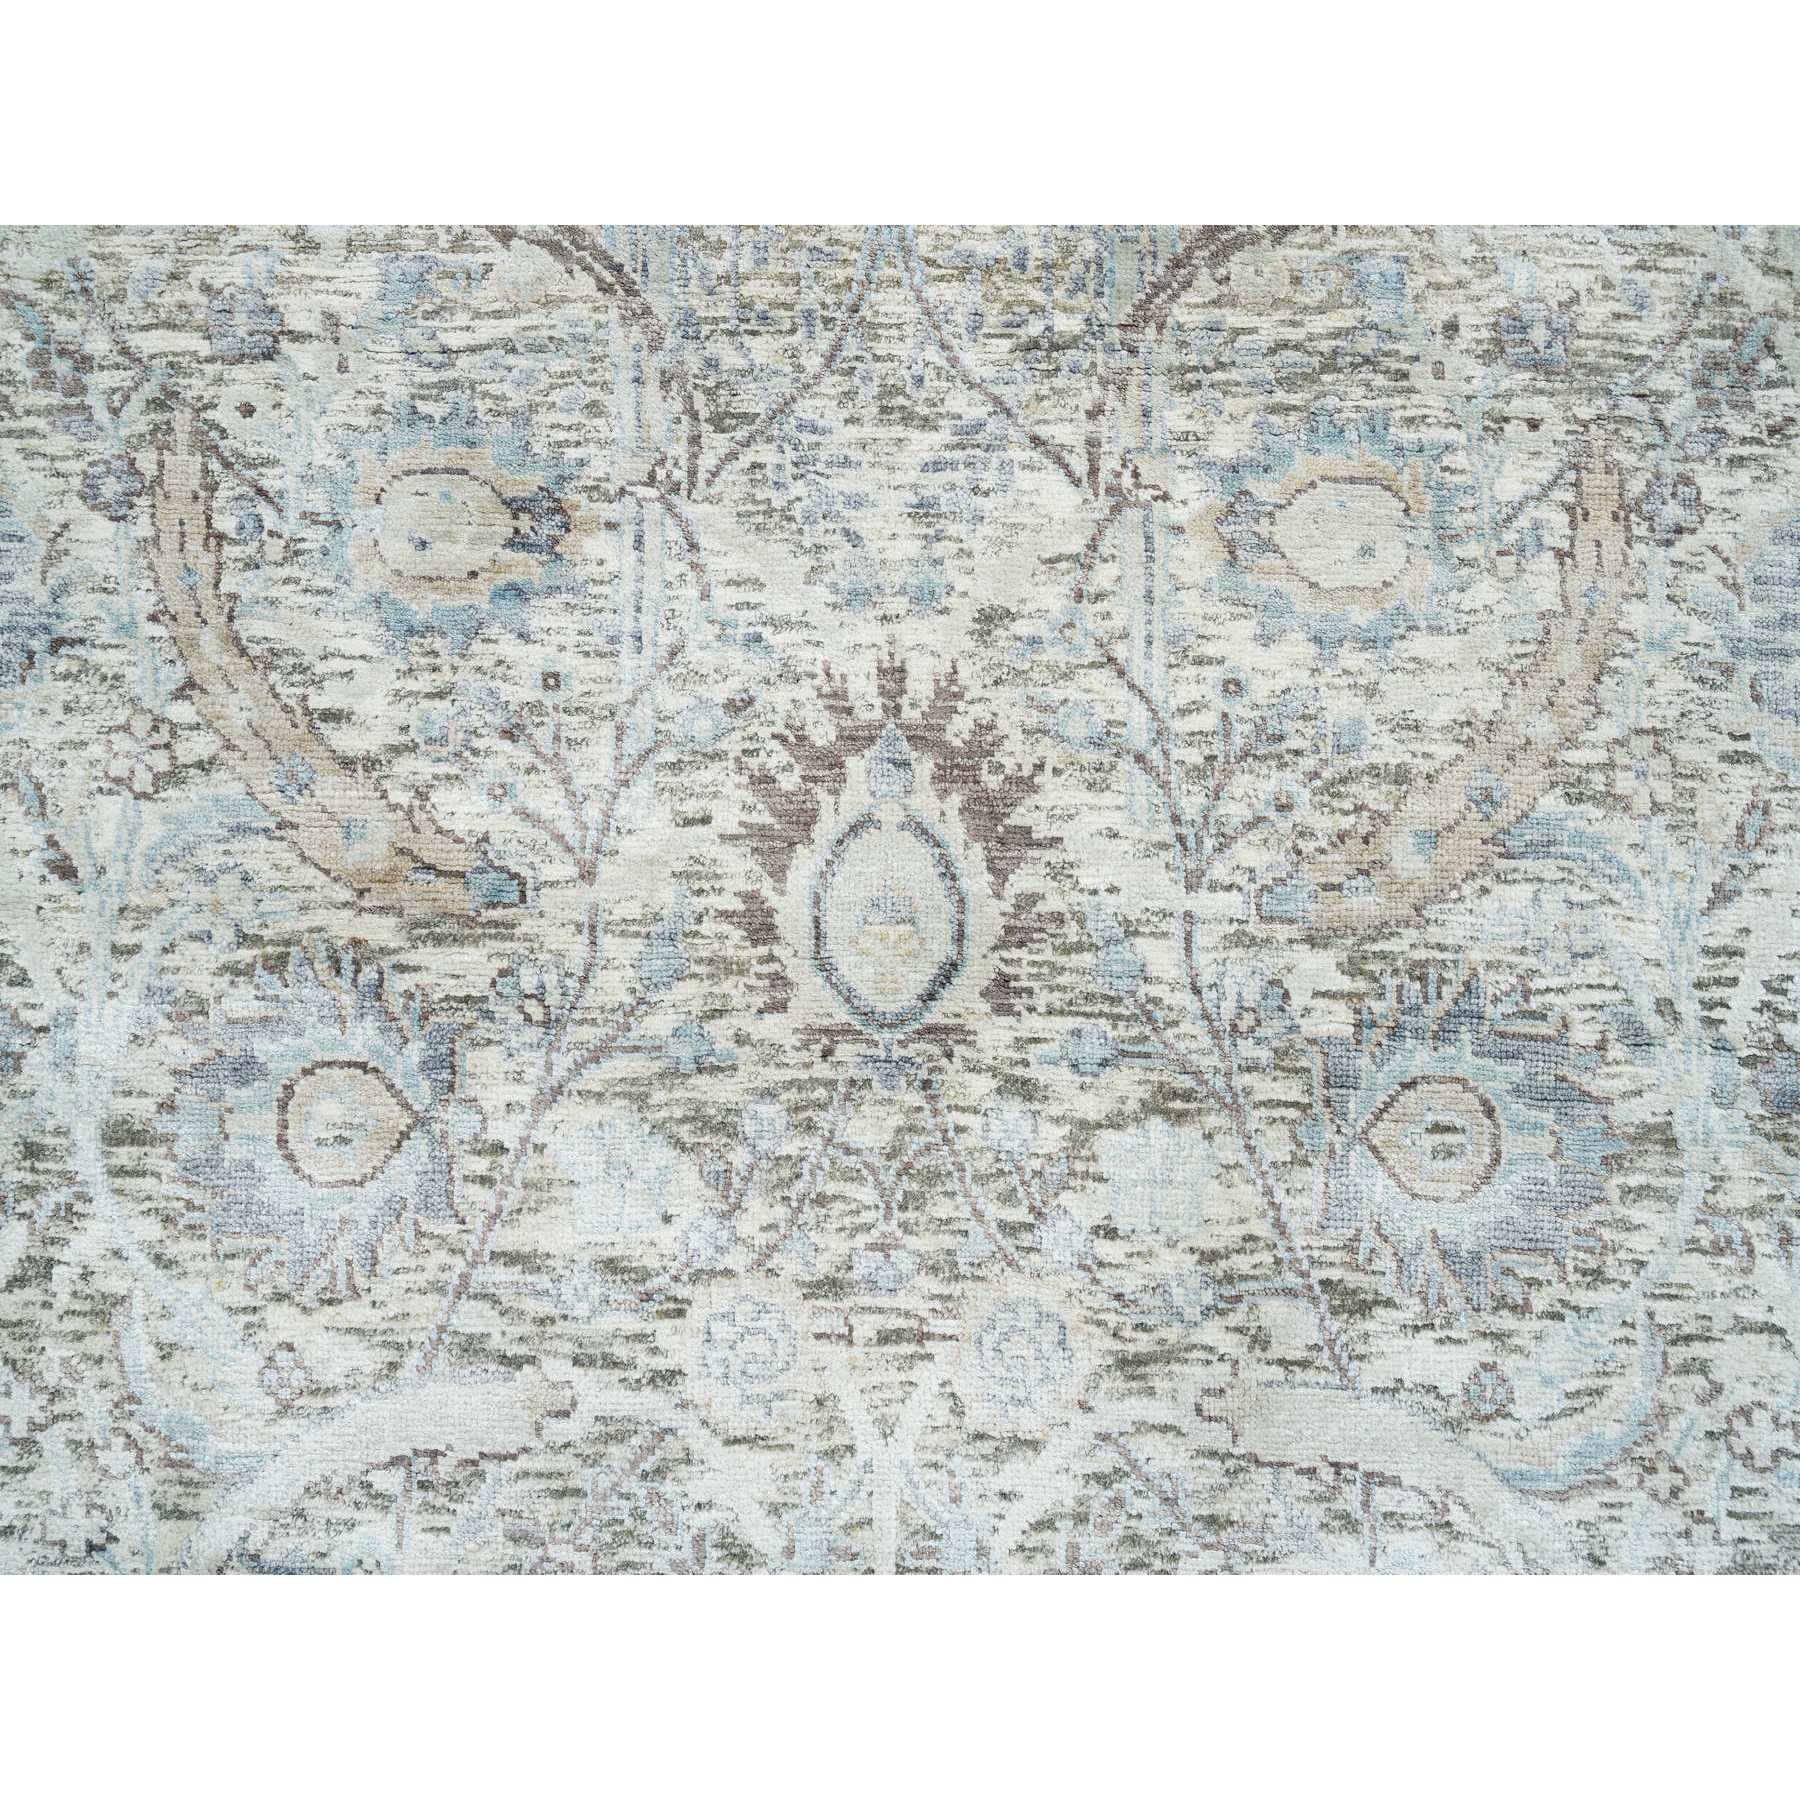  Silk Hand-Knotted Area Rug 3'3